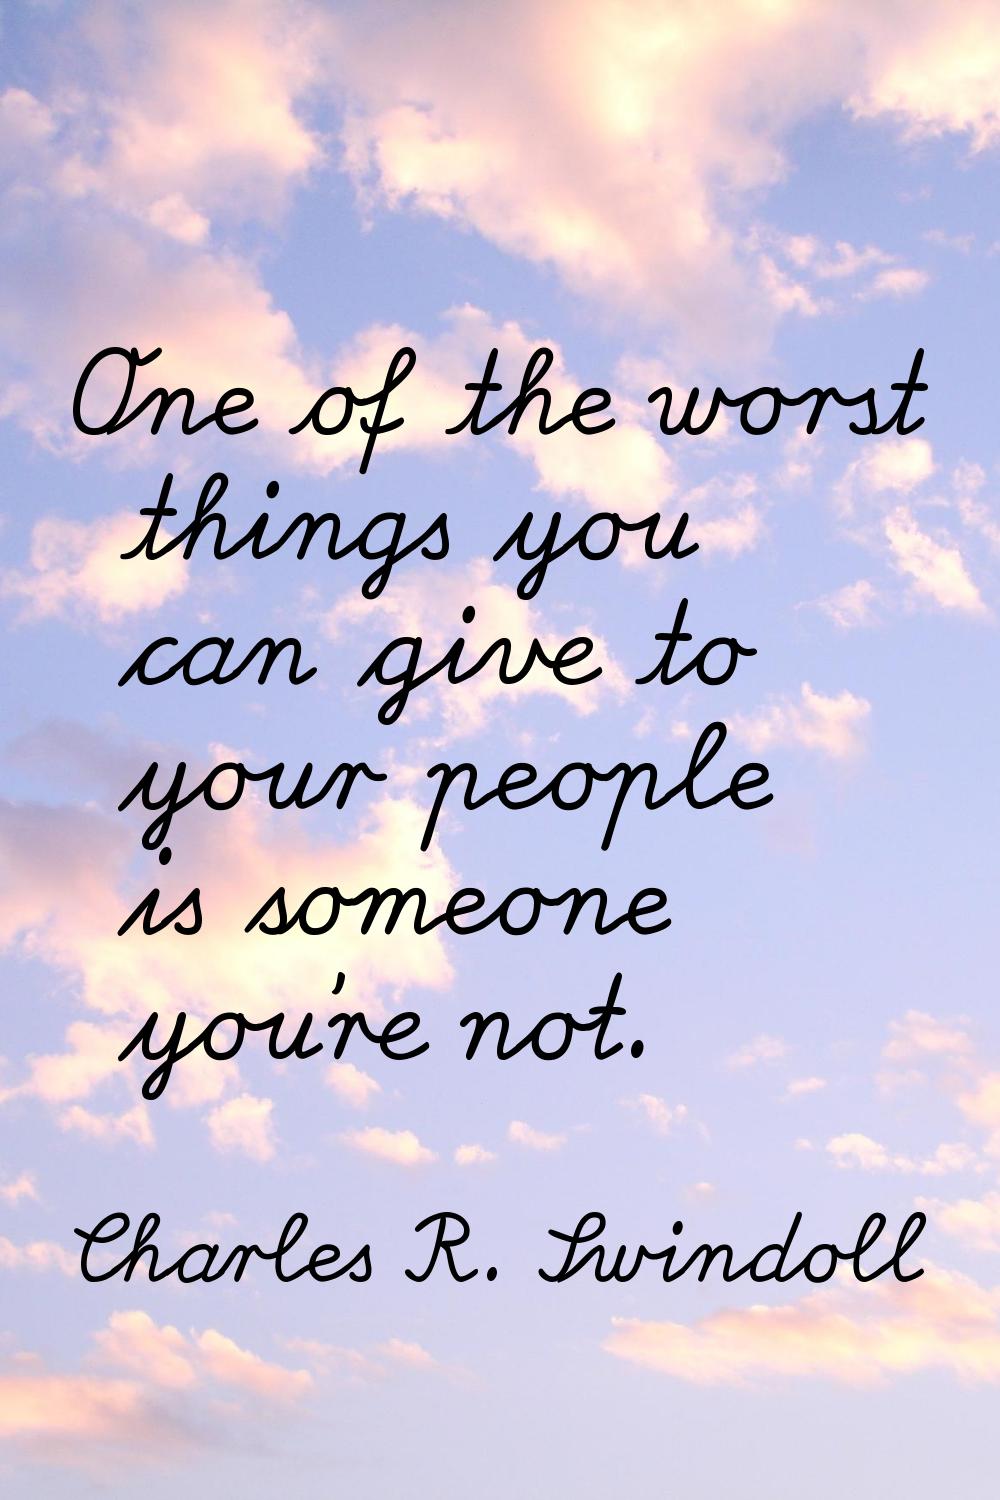 One of the worst things you can give to your people is someone you're not.